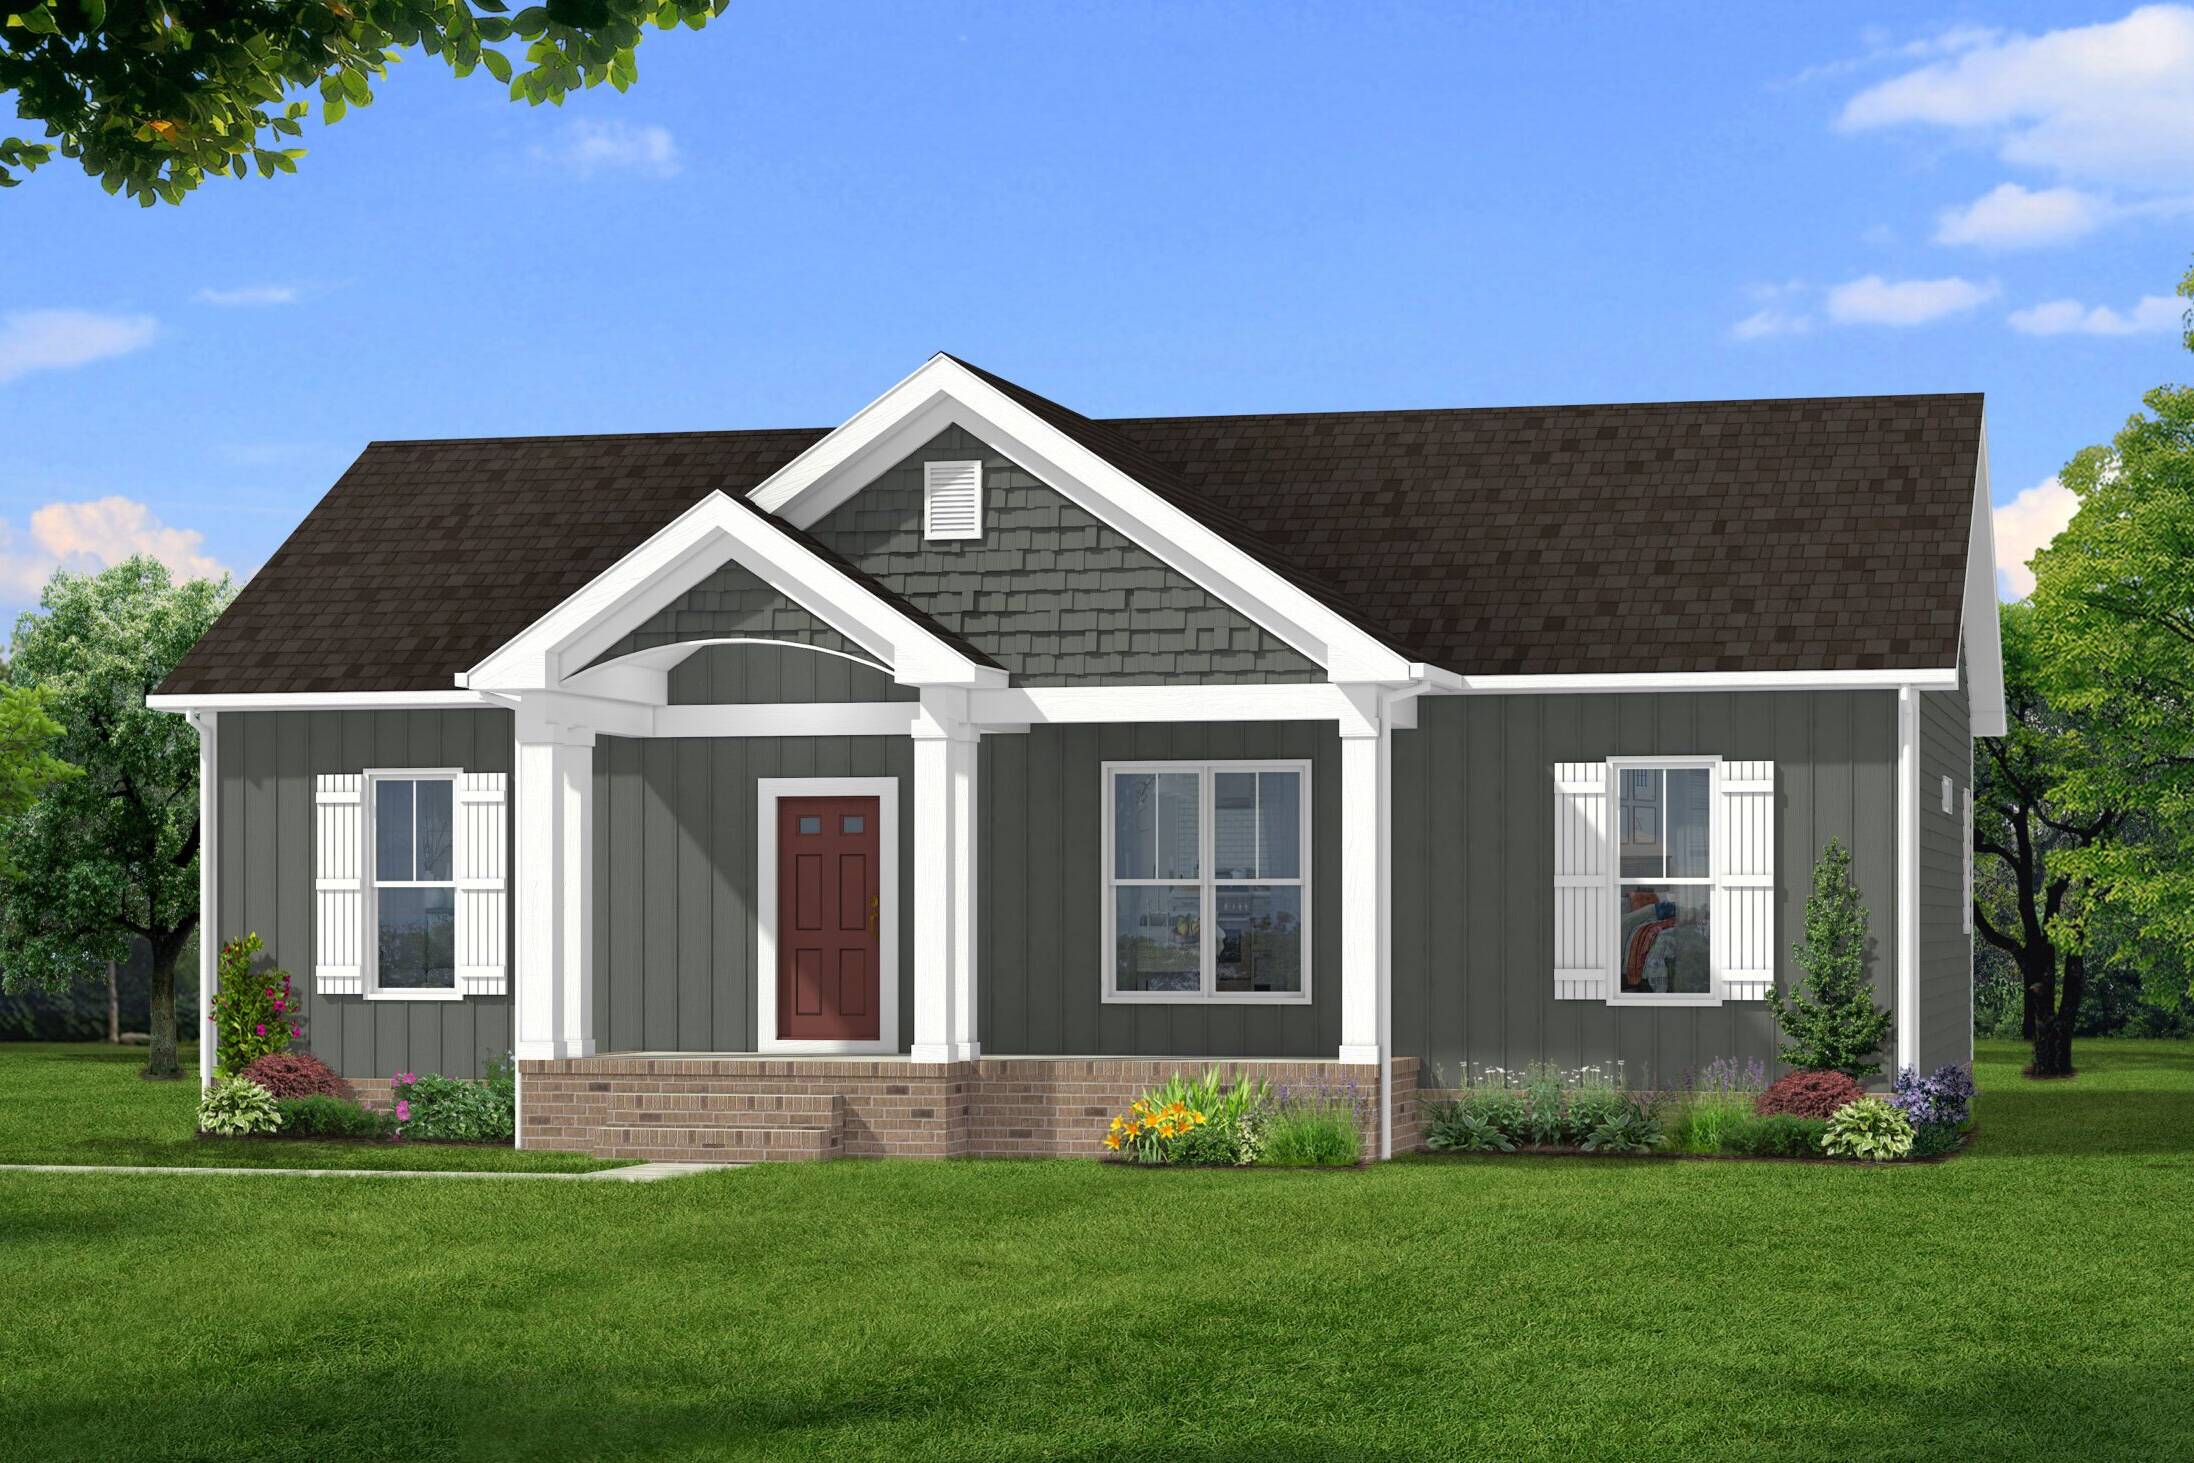 Exterior Rendering Pine Hill Lot 9 6.14.23 Scaled Uai 2194x1463, Rock River Homes